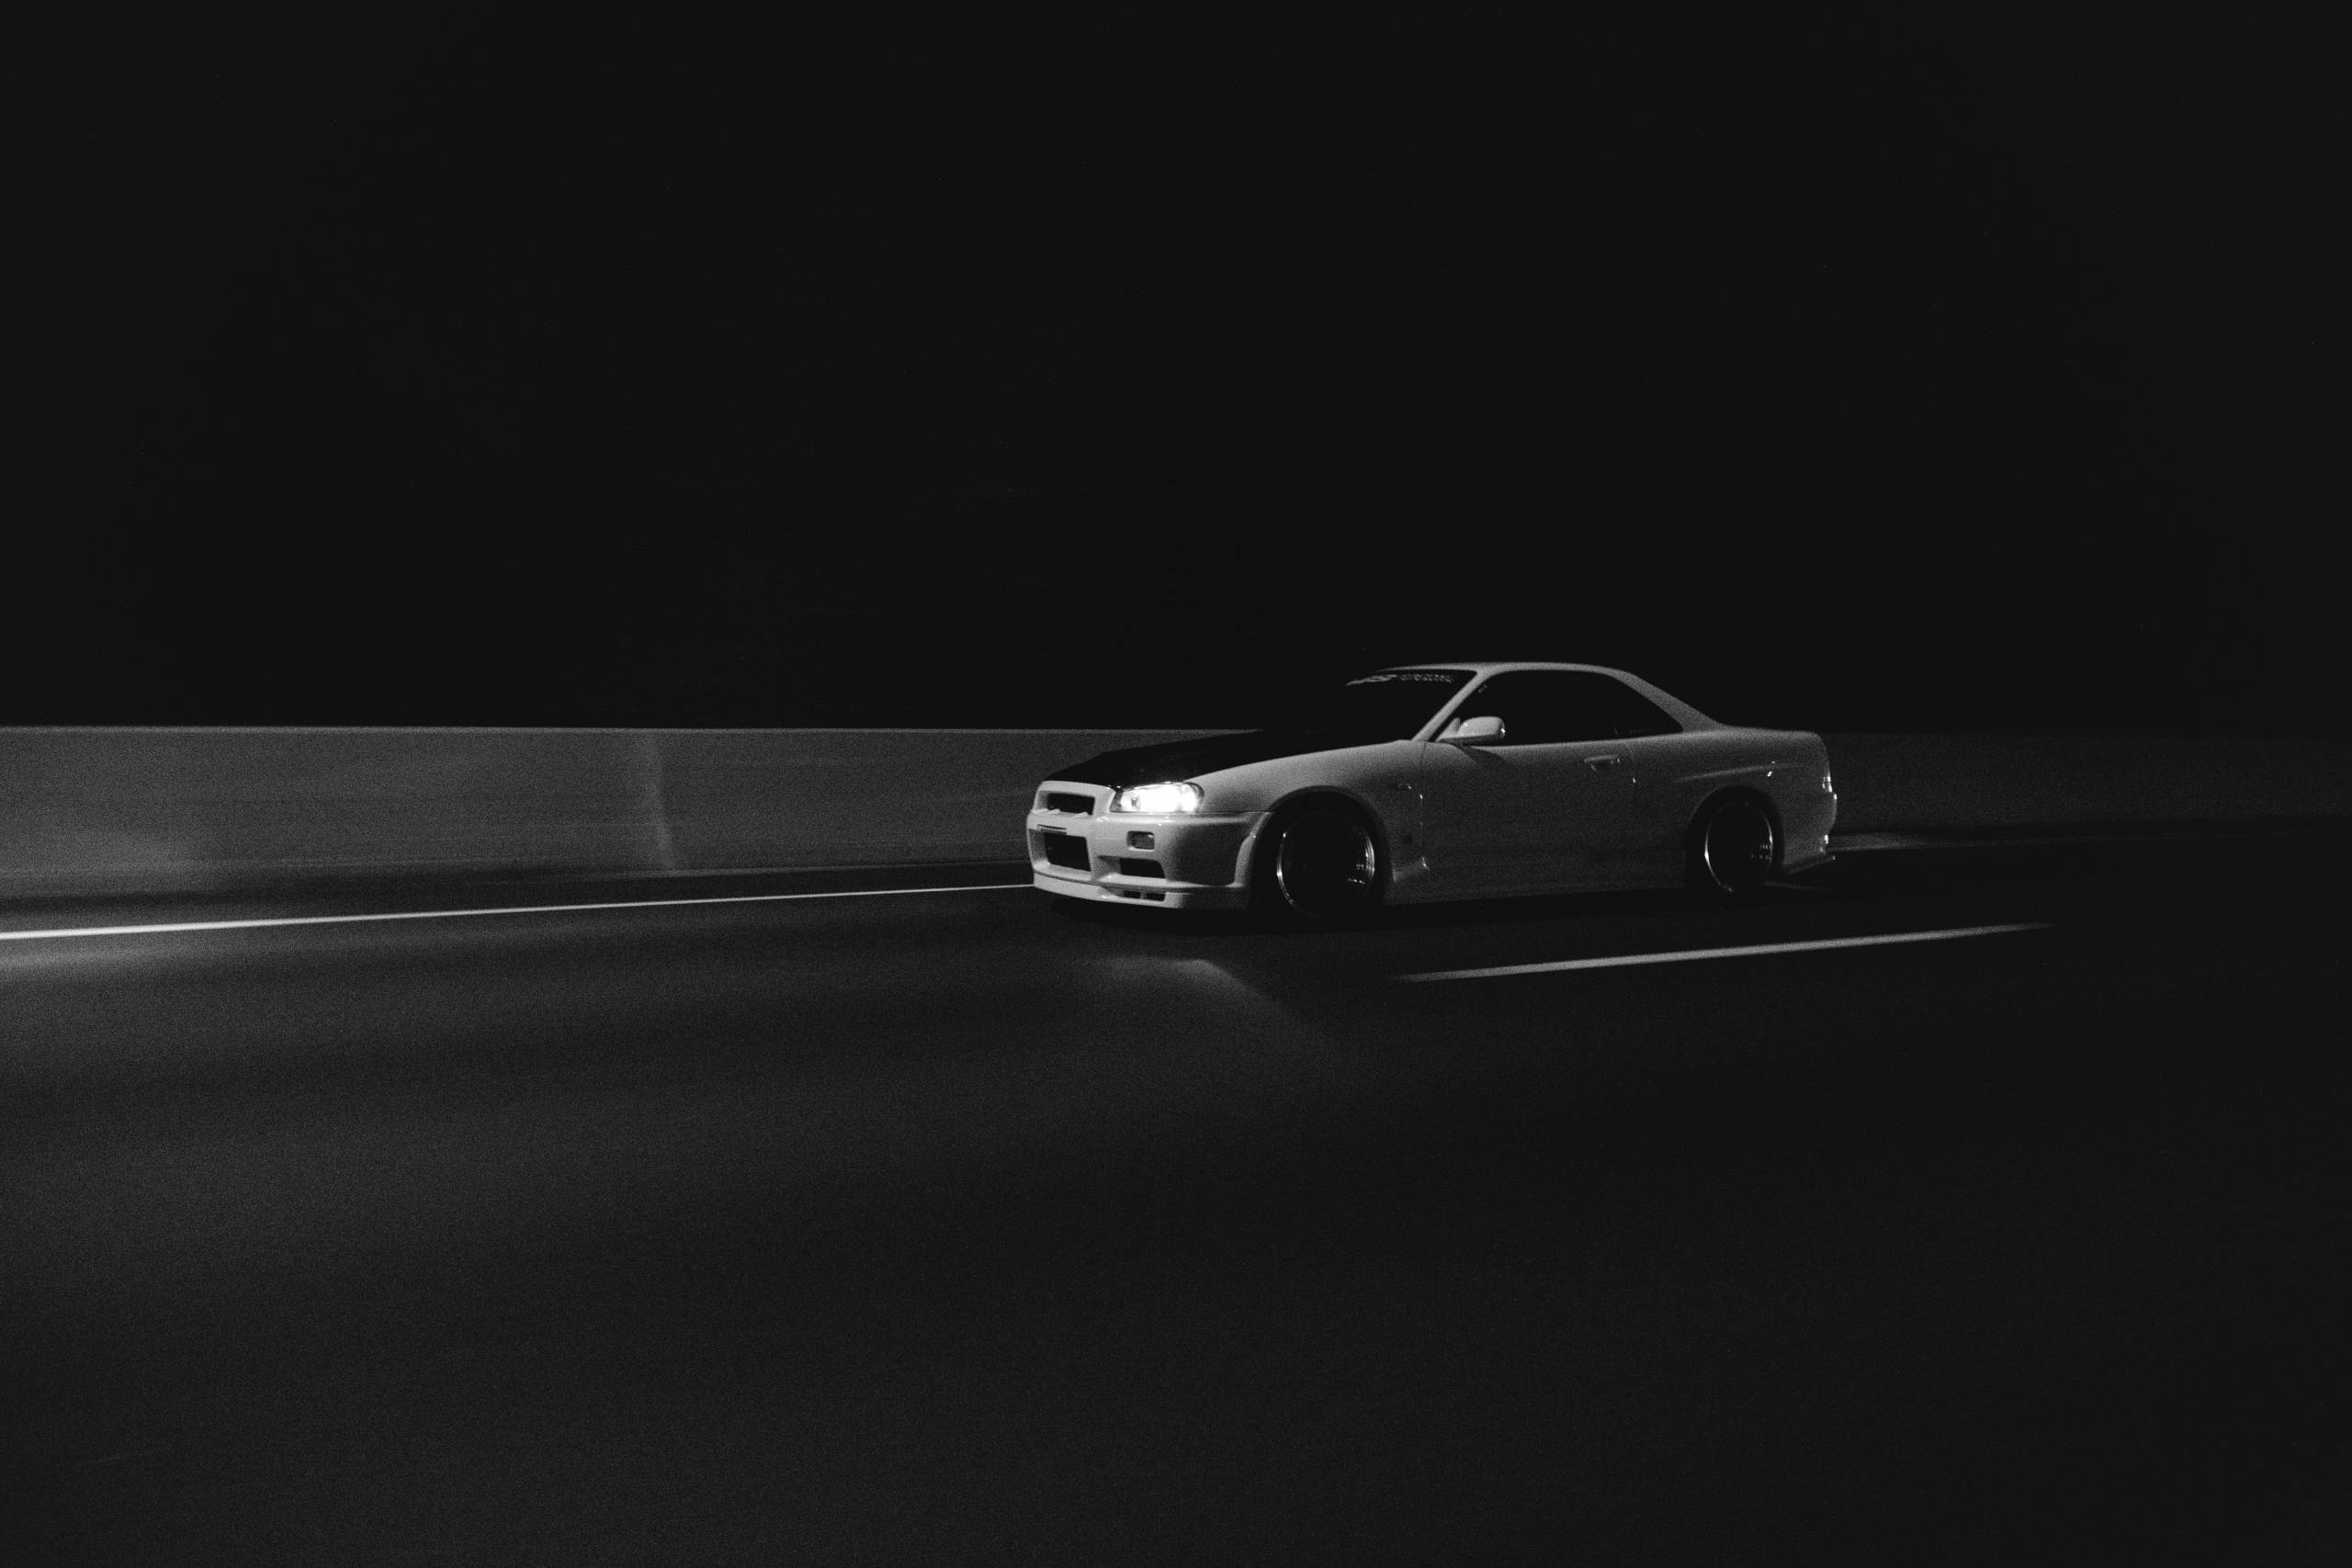 jdm r34 skyline at night in black and white